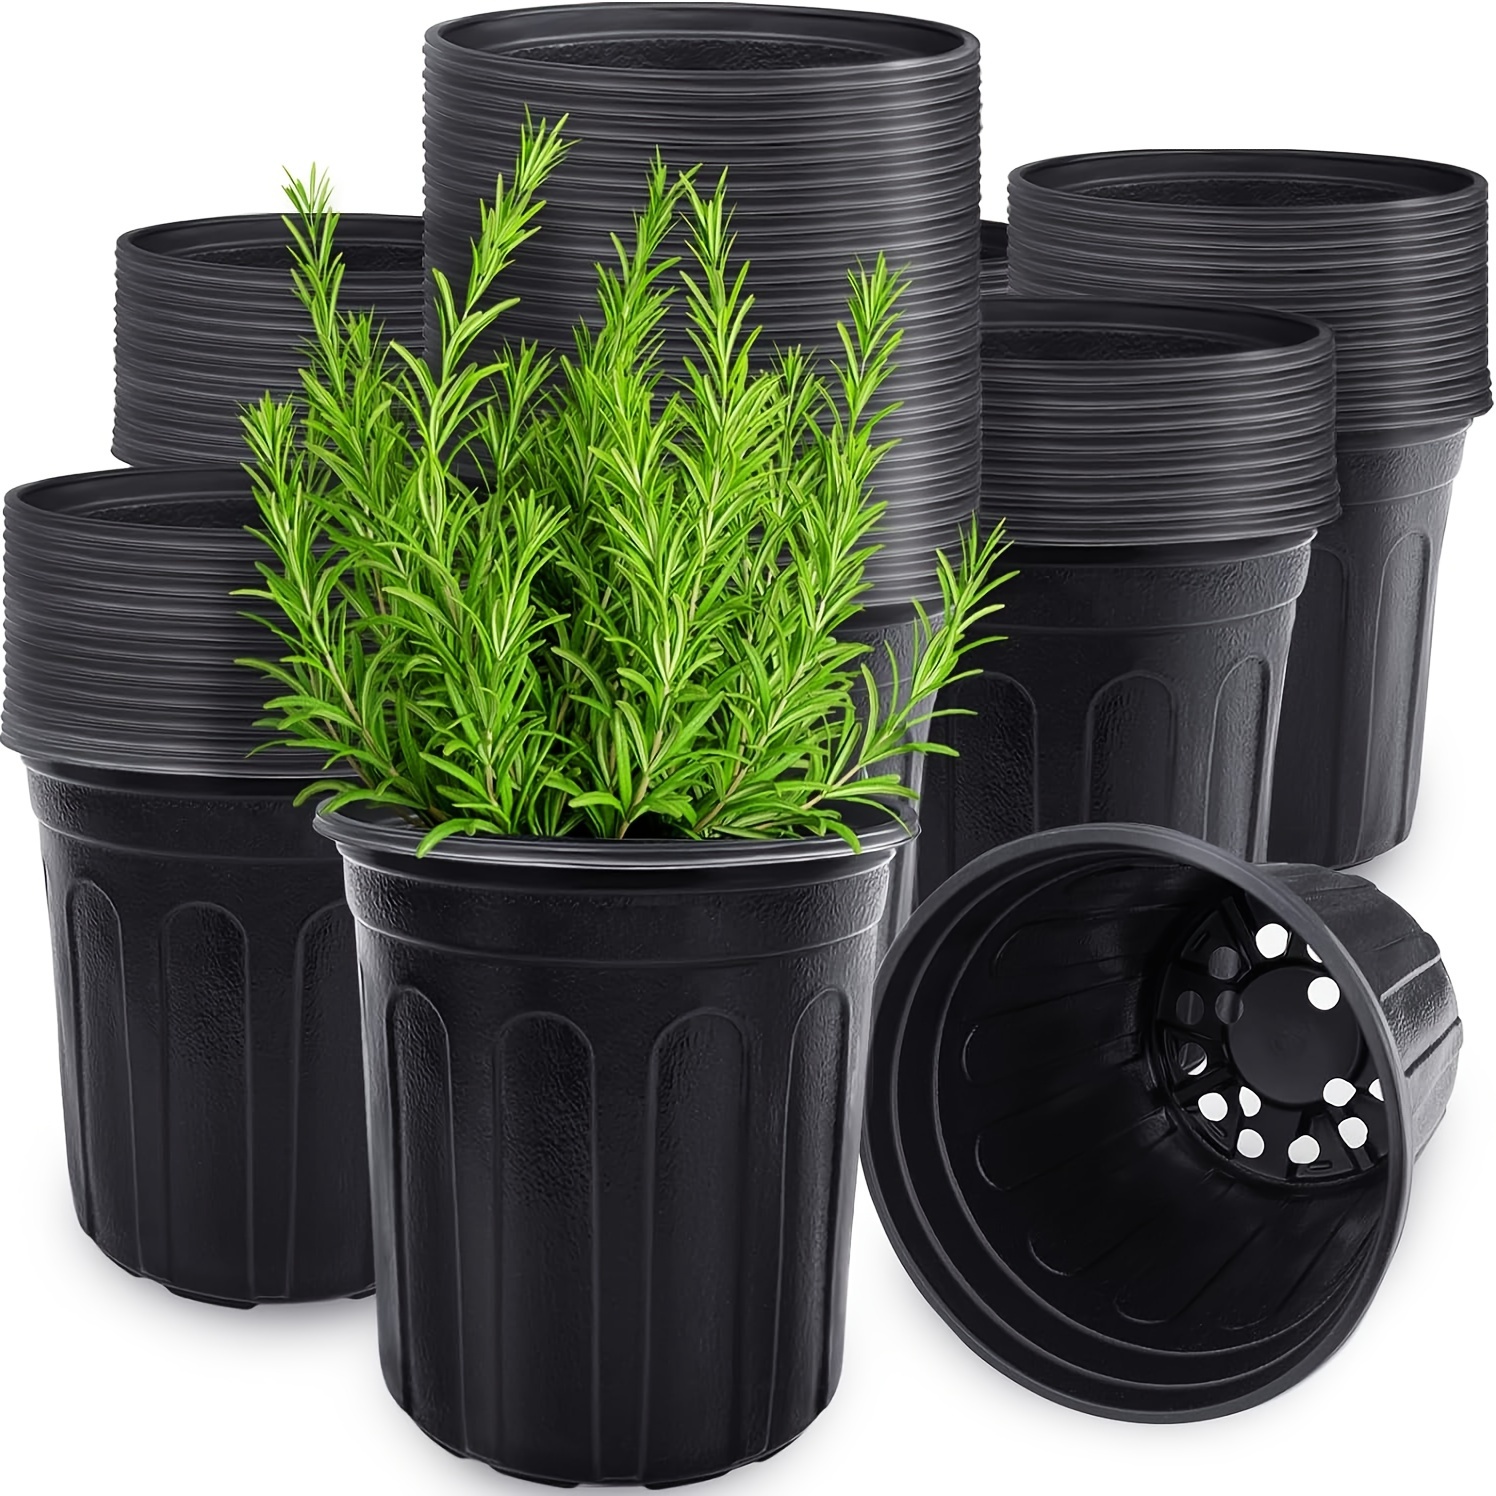 

Classic Style 60-pack 1-gallon Nursery Pots With Drainage Holes, Round Plastic Plant Containers For Indoor And Outdoor Use, Floor Mounted, Patterned Design, Multiple Components Included